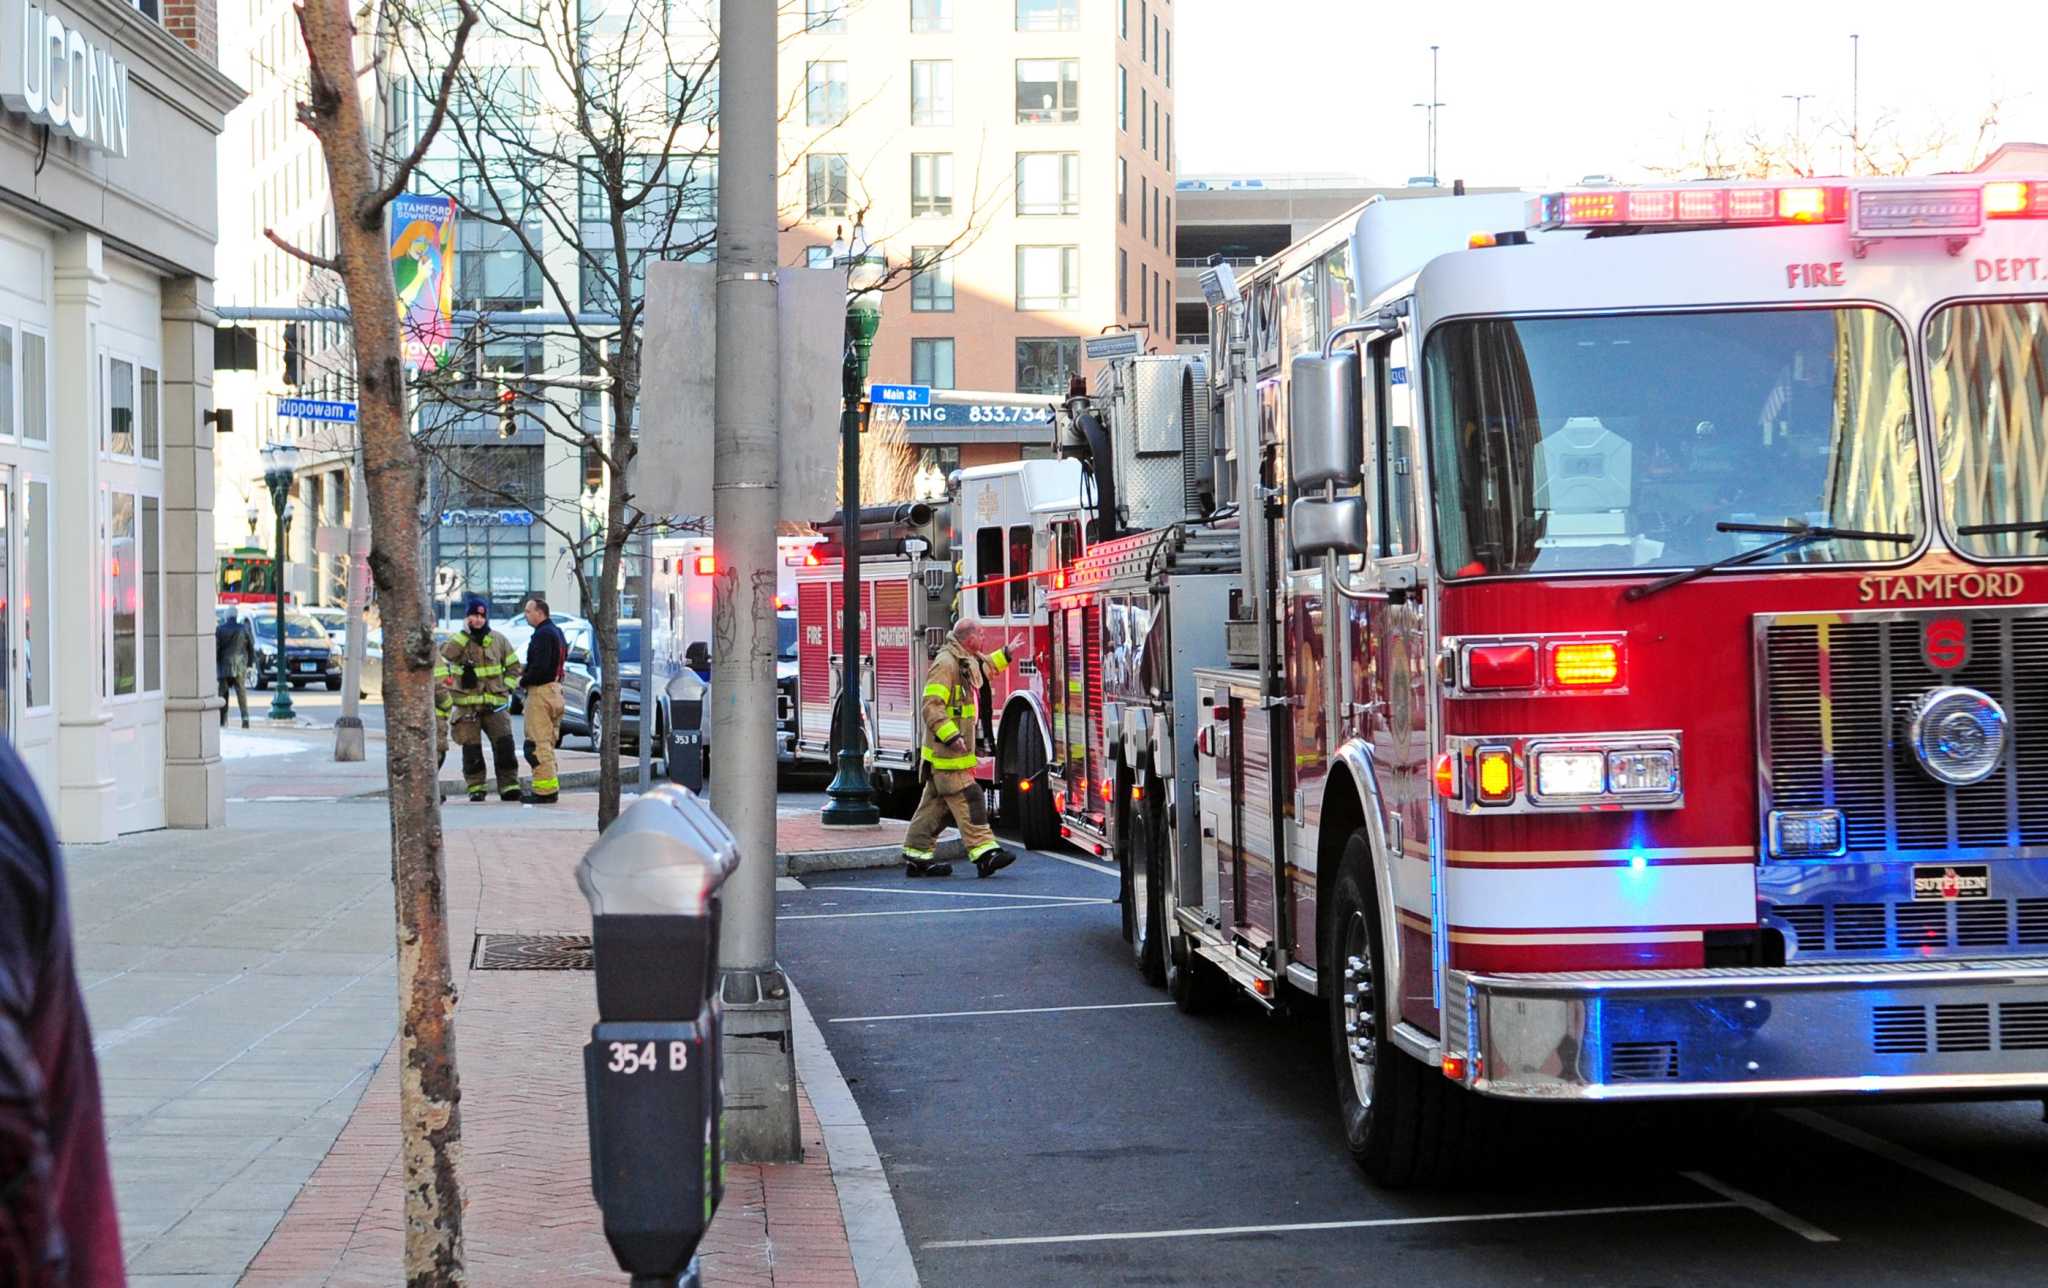 No injuries in Stamford kitchen fire, officials say